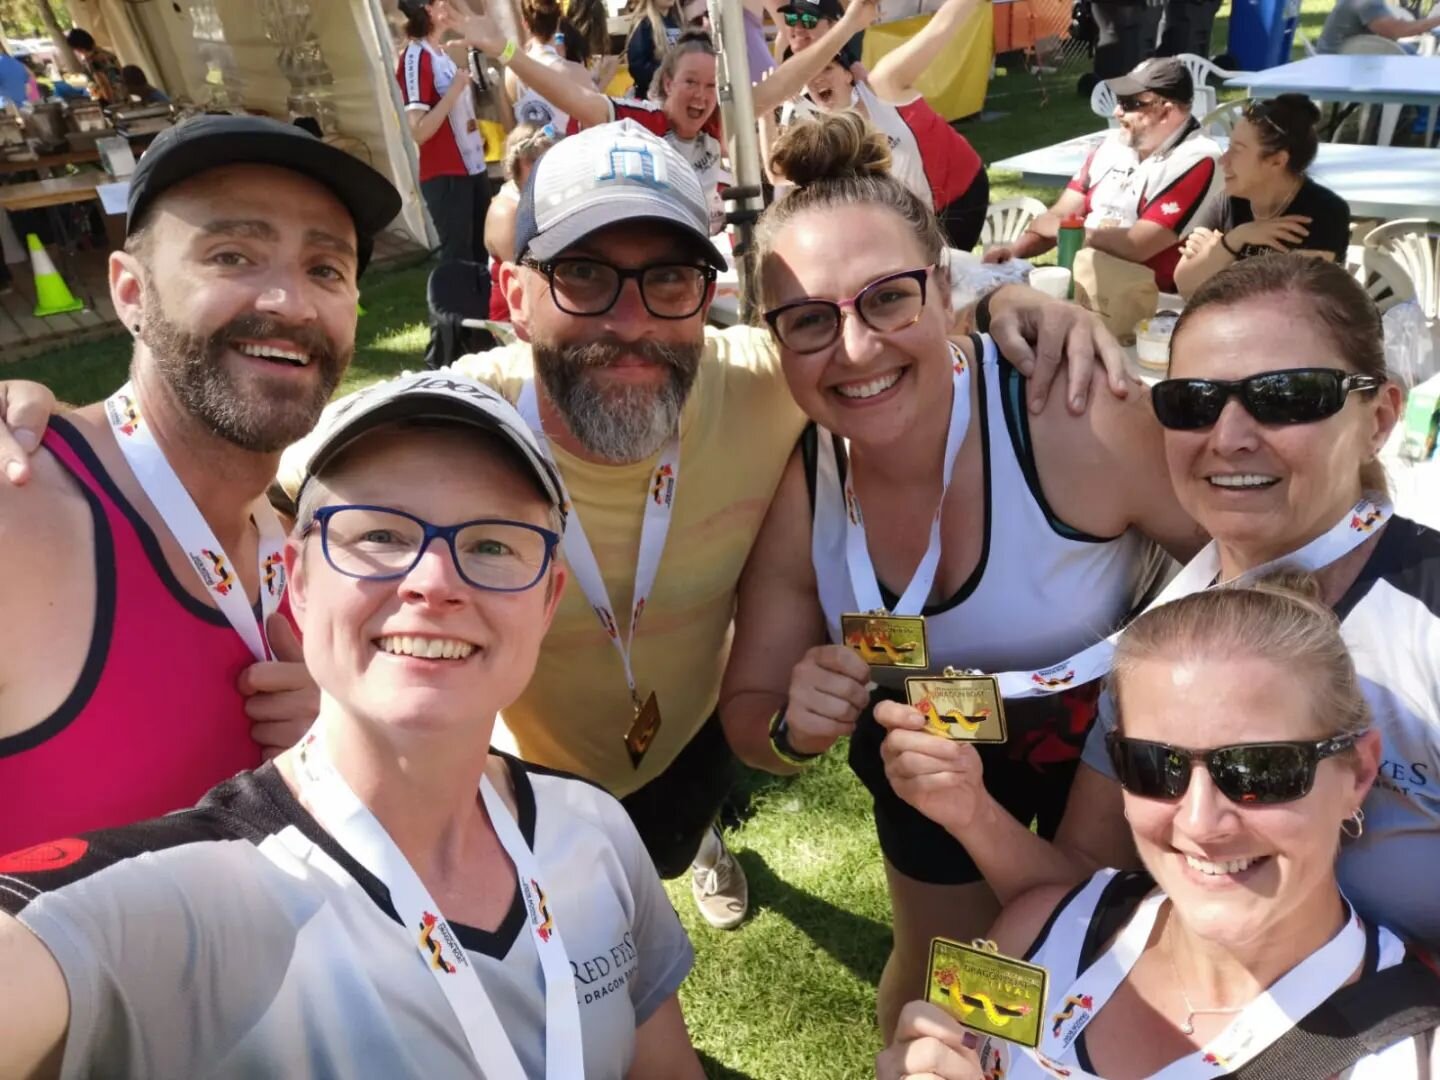 The best feeling is winning with your friends and second family. ❤️
.
.
#paddlesupyyc #yycdbs #lethdragonfest #lethdragonfest22 #redtomatoes #dragonboatfamily #redeyesdragonboat